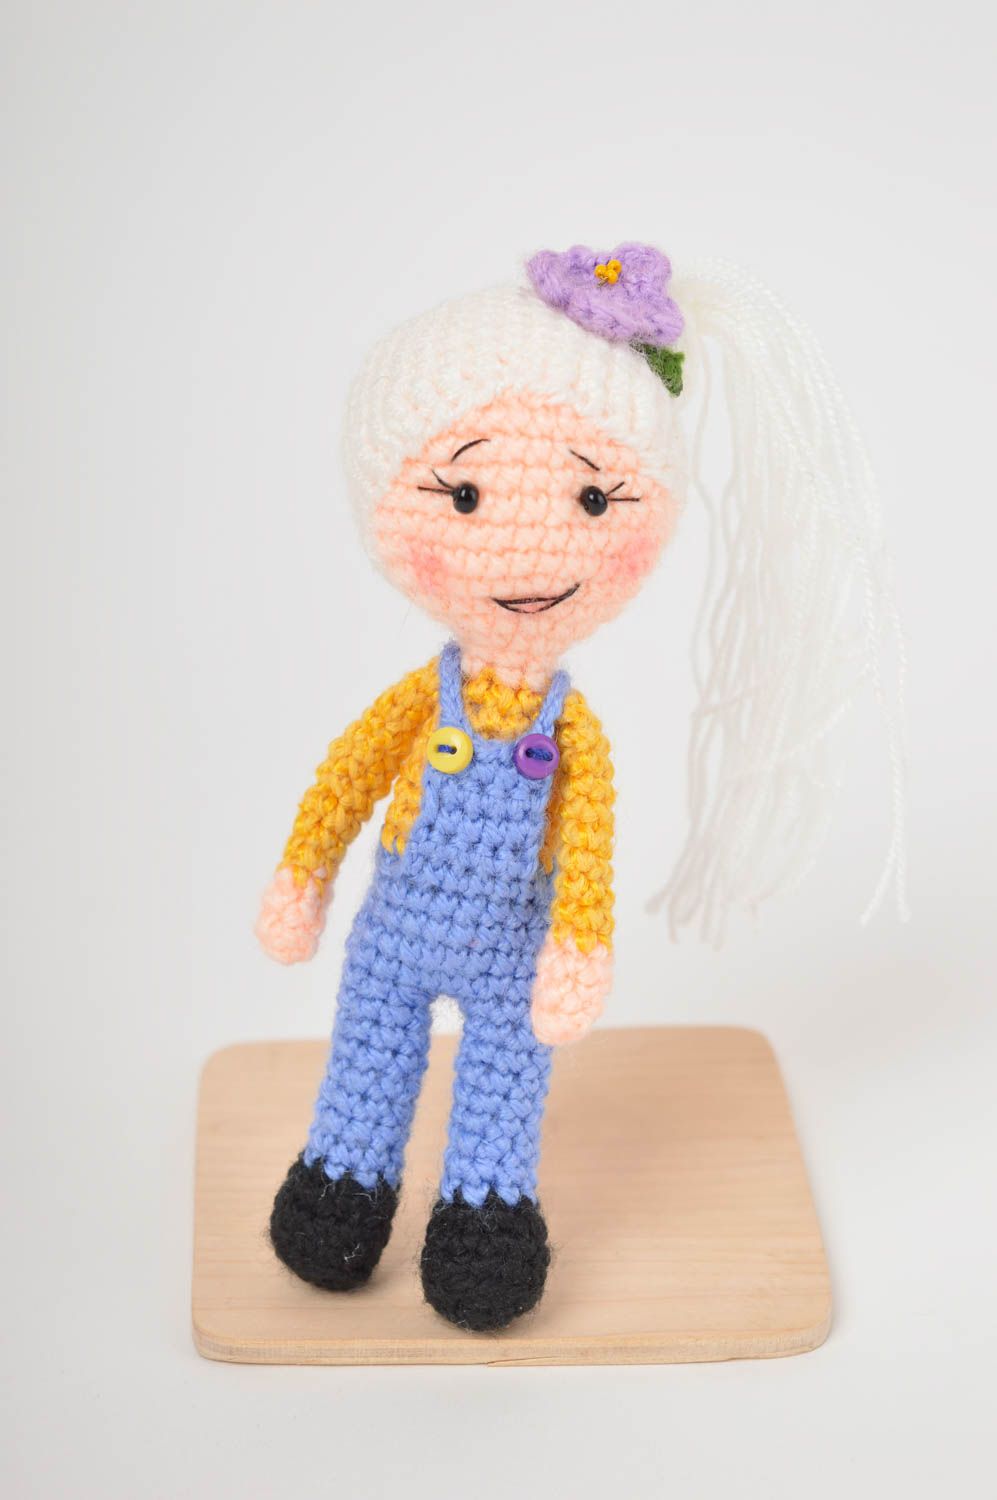 Knitted stuffed girl toy in blue jeans and pink sweater and blond hair. 4 inches tall photo 2